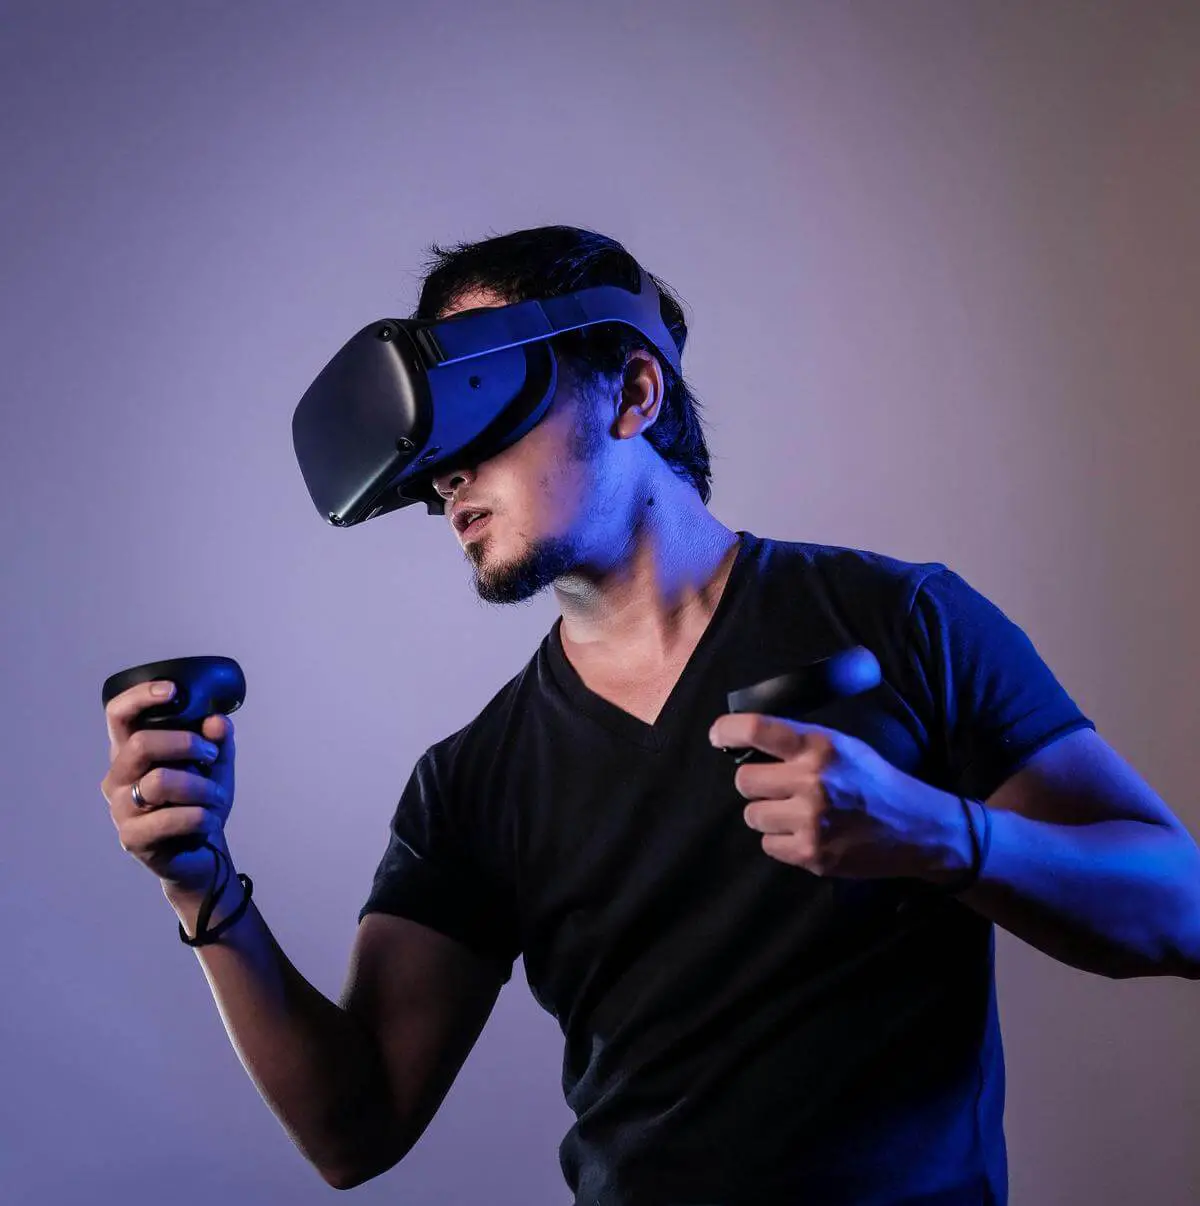 A futuristic image showing a person wearing a wireless VR headset and interacting with virtual content.